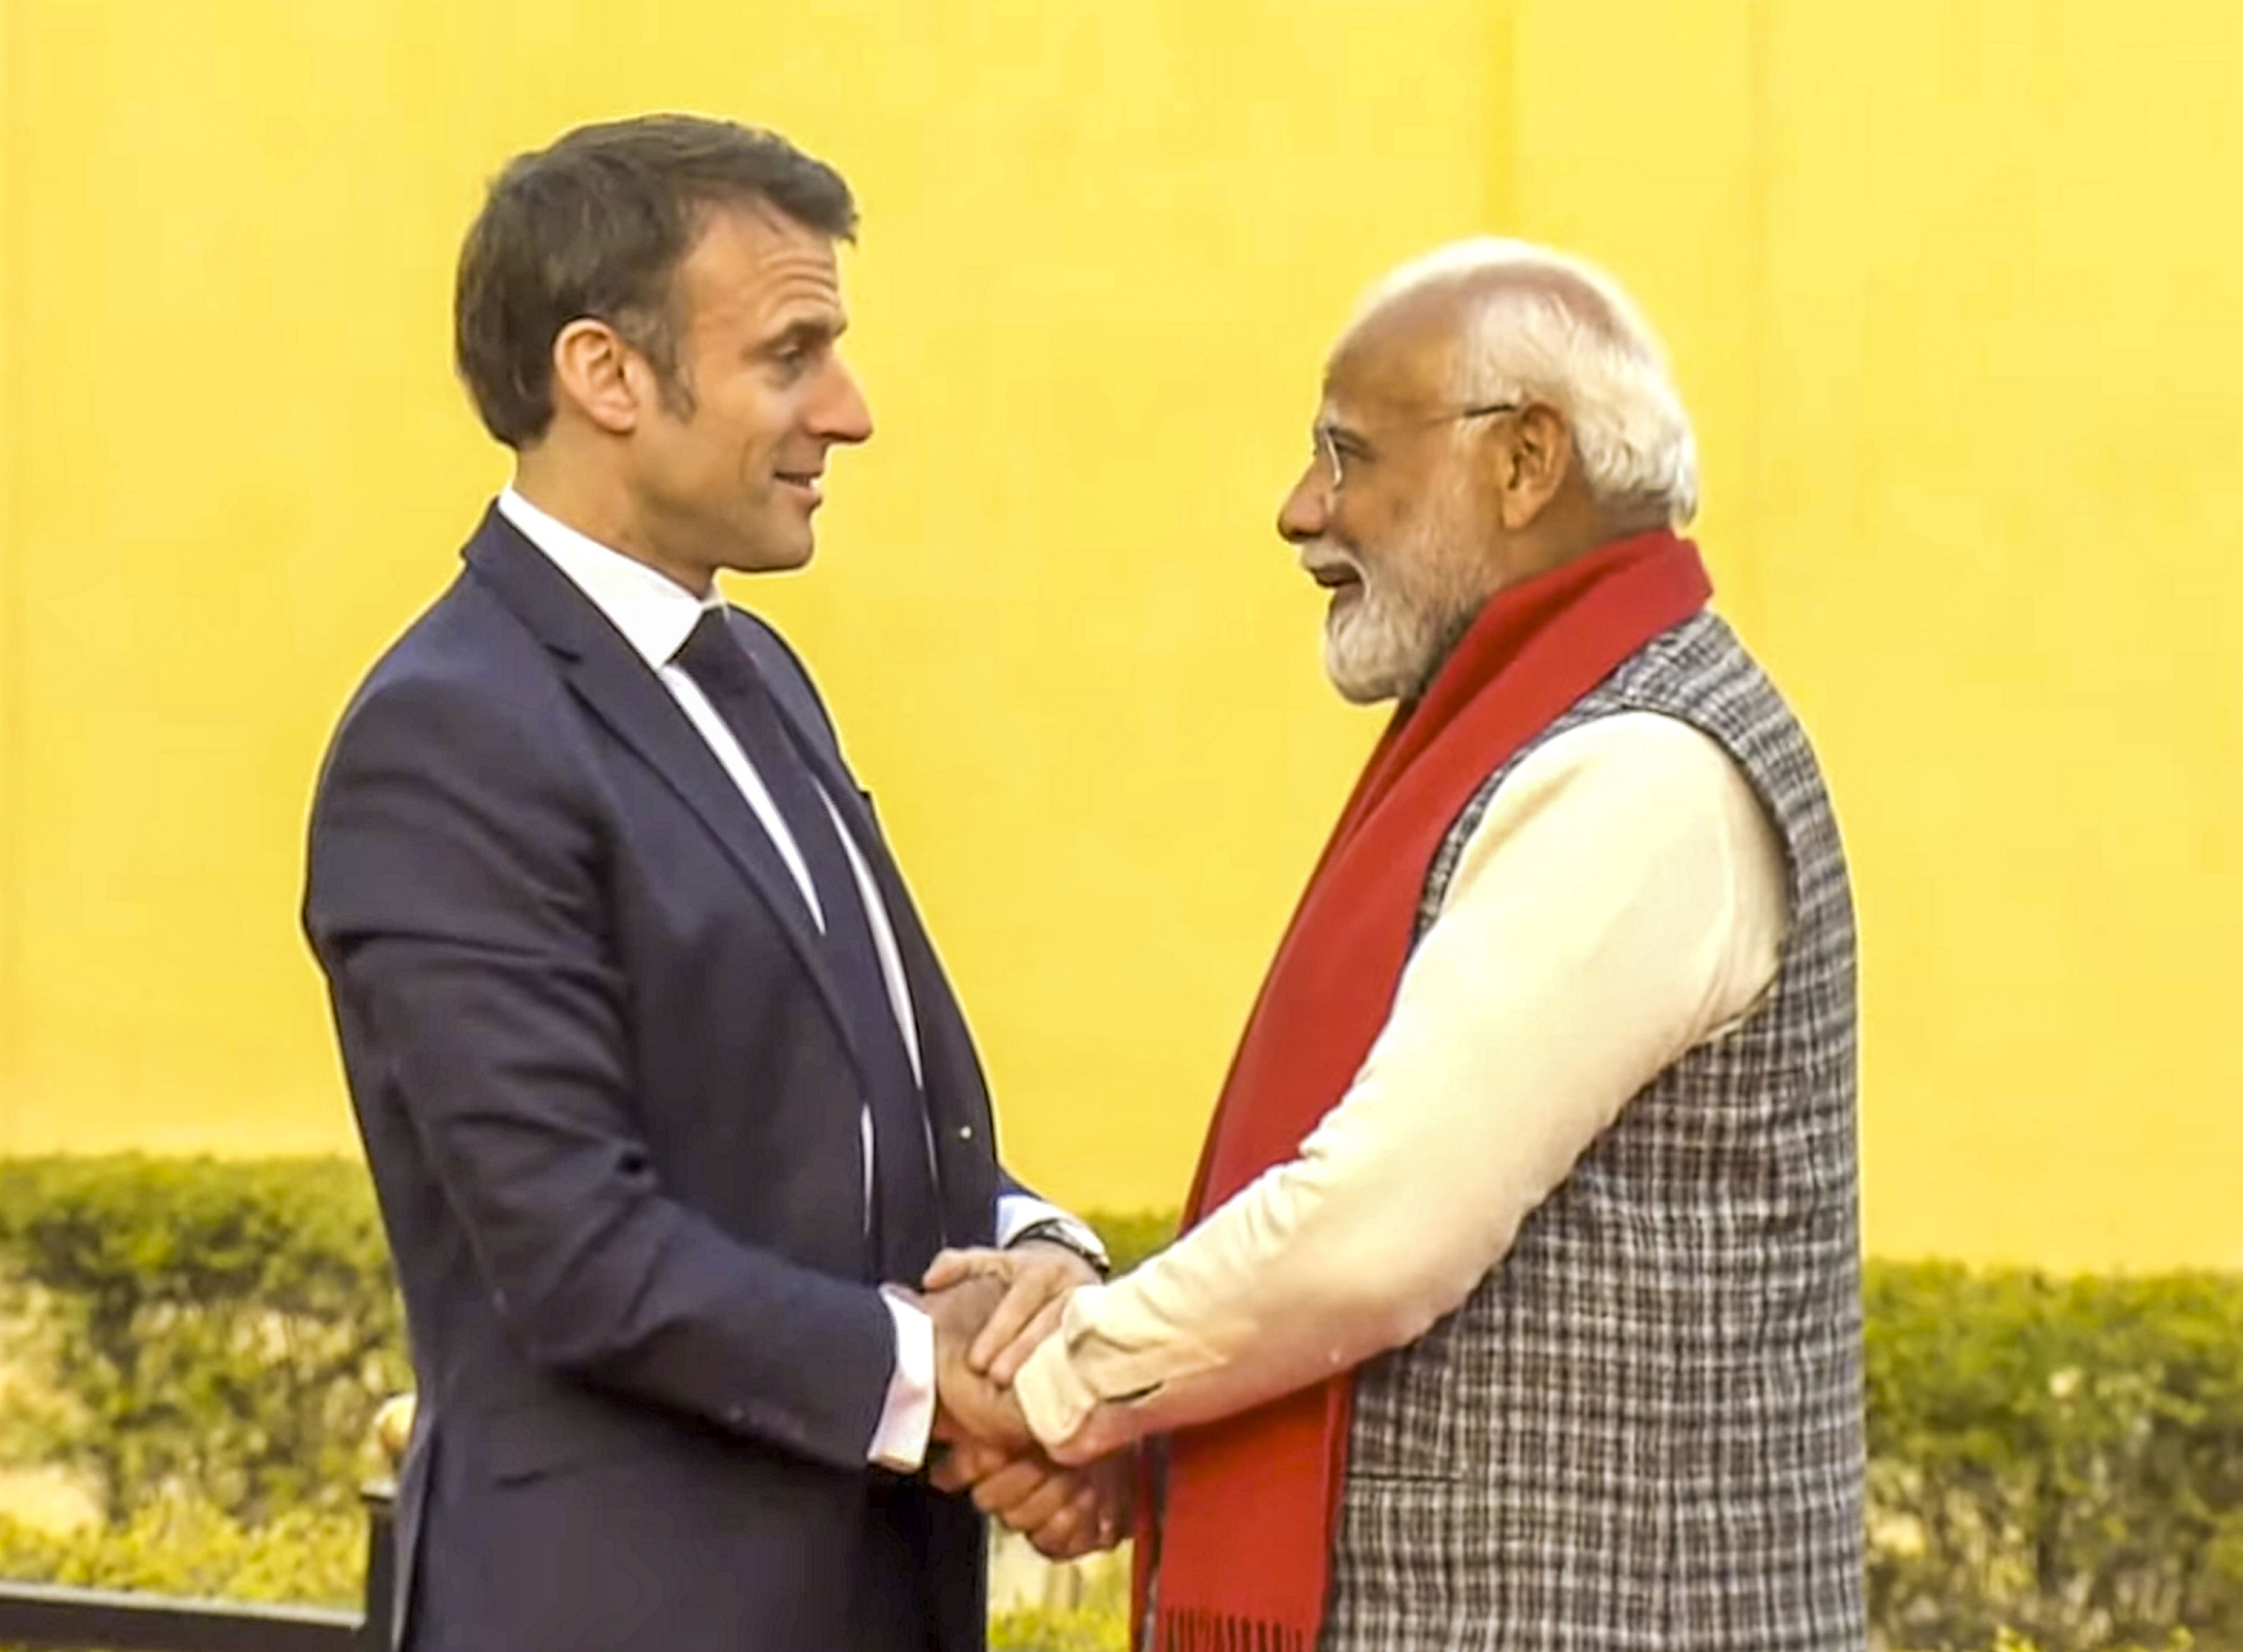 when macron met modi: french leader joins pm in roadshow, gets ram temple replica as gift